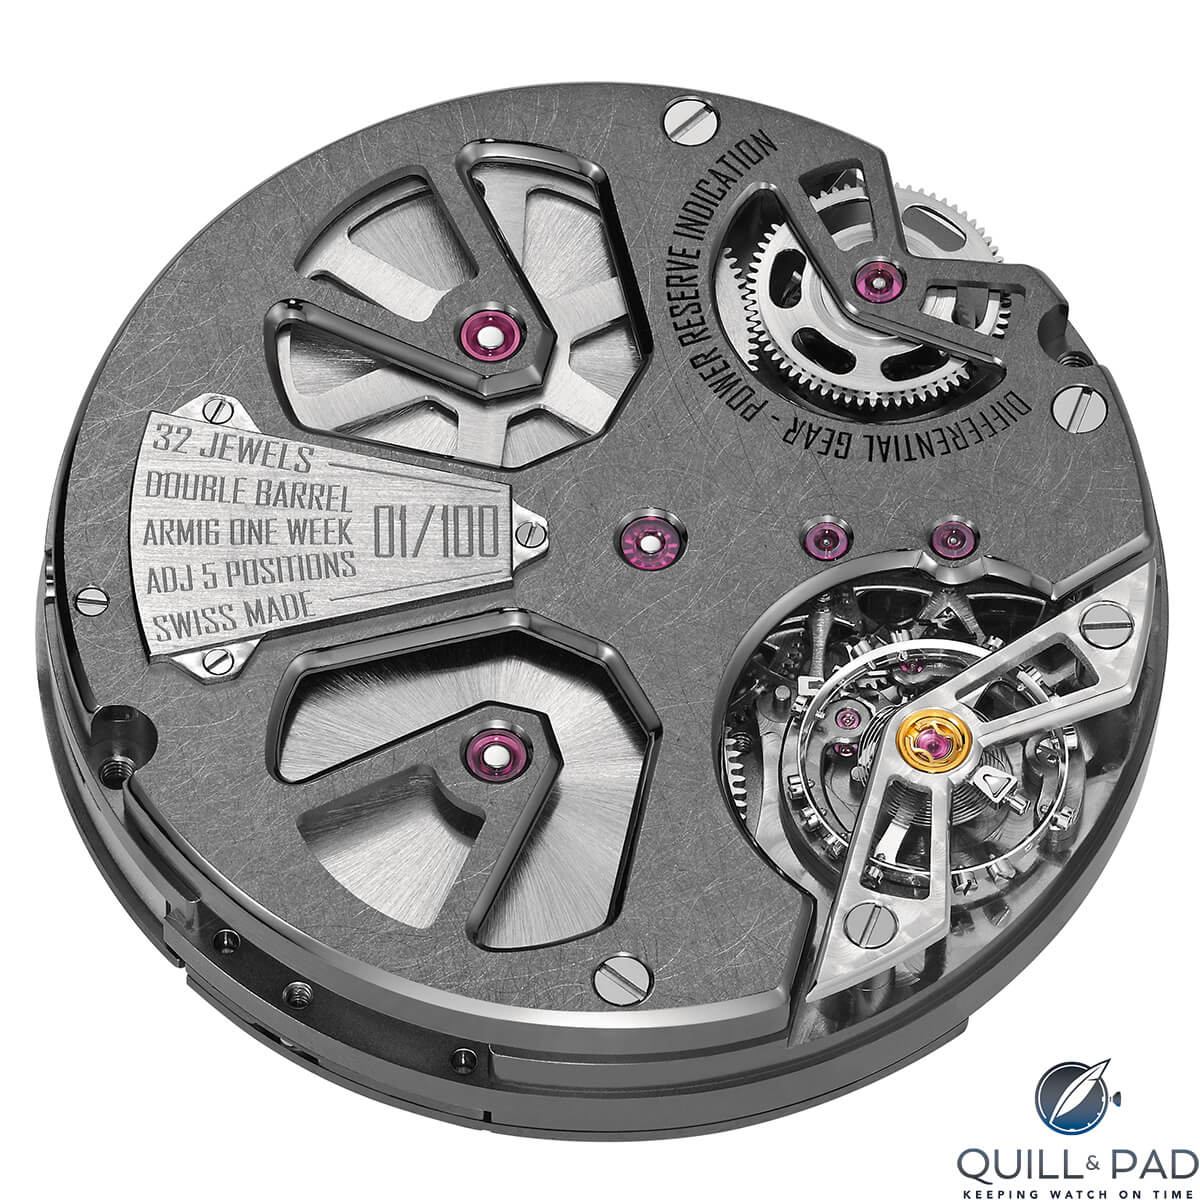 Top of the movement of the Armin Strom Edge Double Barrel